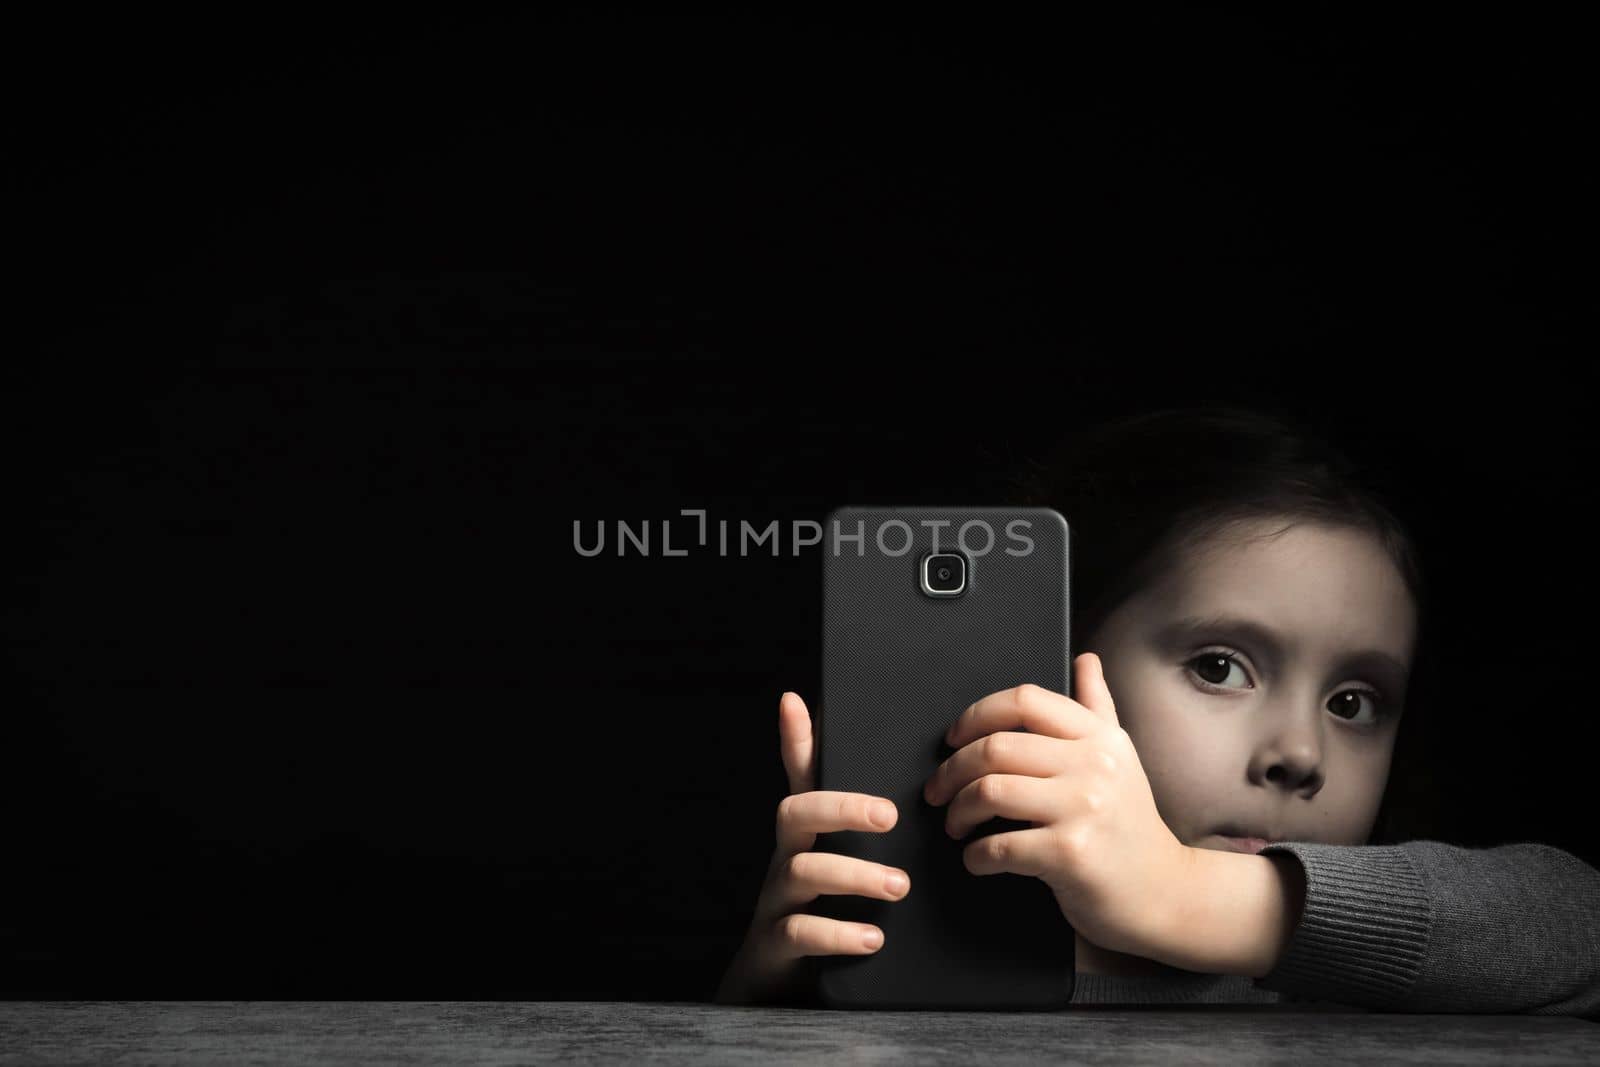 Little child with a gray face hides behind a large smartphone in his hands, on a black background. Kid gadget addiction and insomnia, psychological problems, copy space